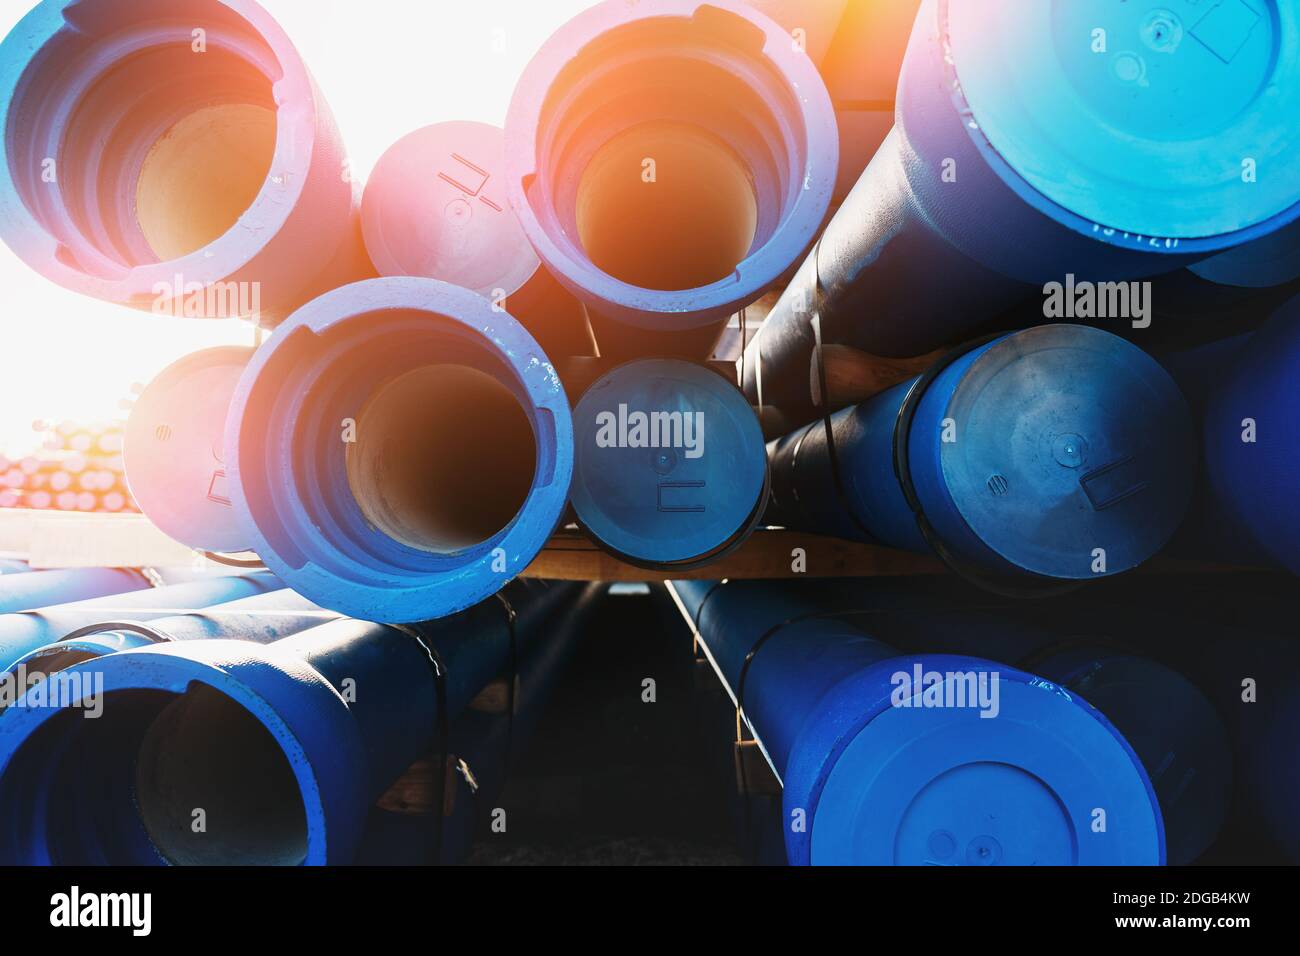 Big Blue Plastic PVC Water and Drain Pipes in sunlight. Stock Photo